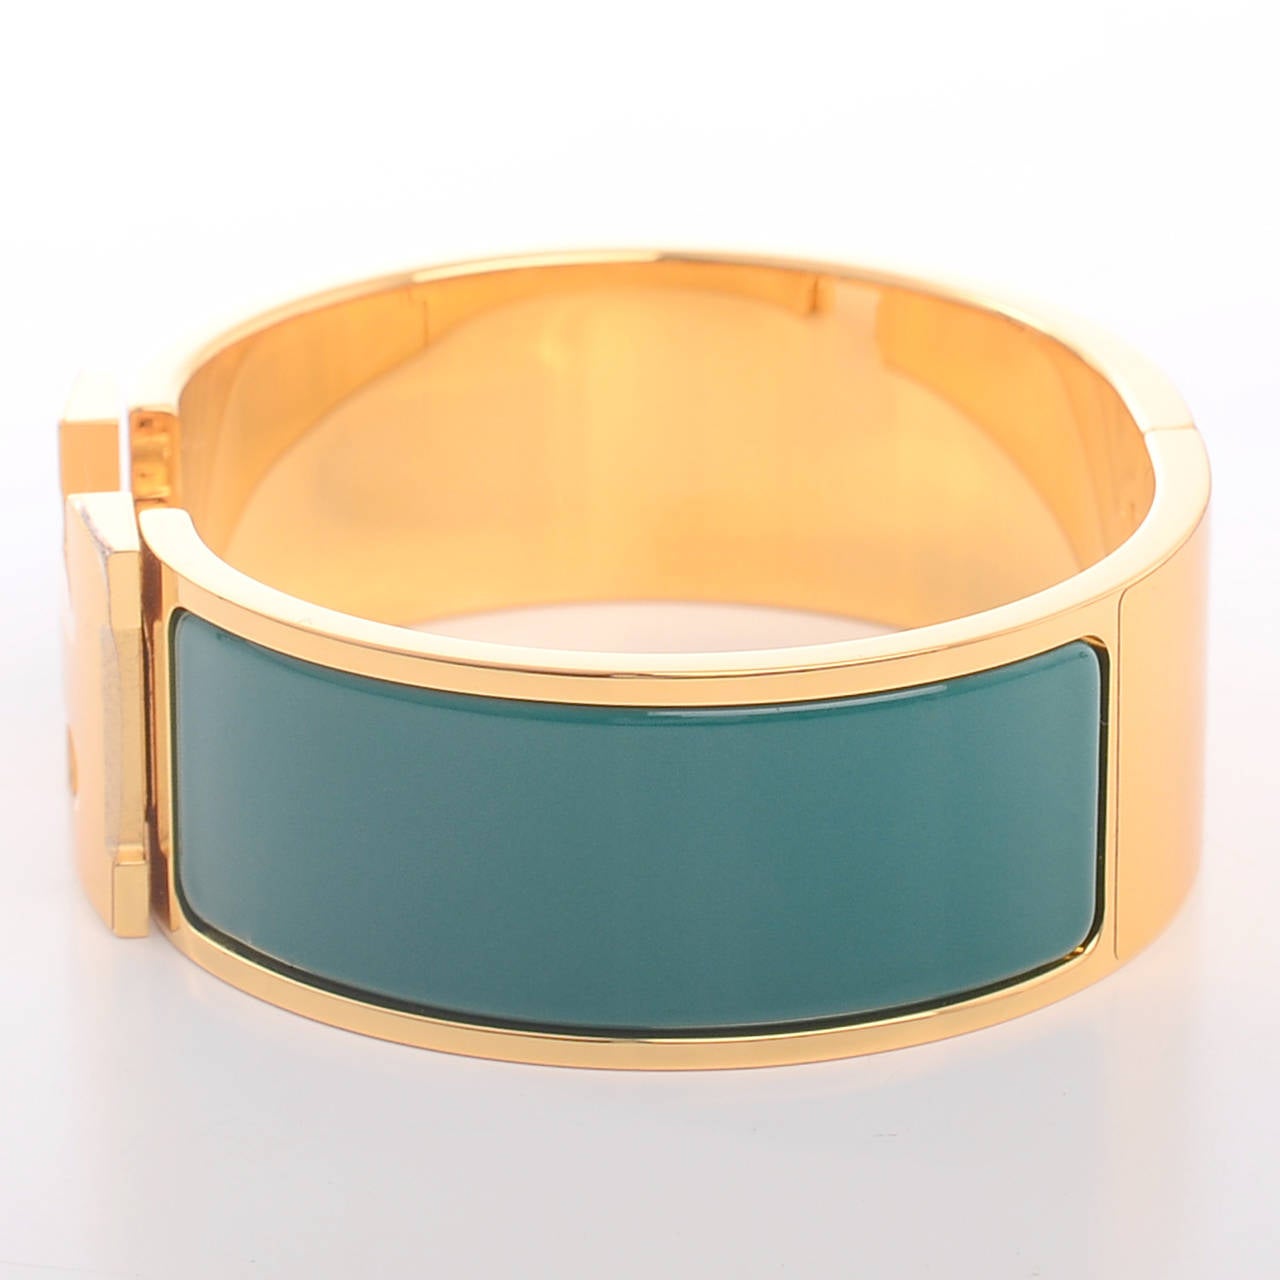 Hermes wide enamel Clic Clac H bracelet in emerald green enamel with gold plated hardware in size PM.

Origin: France

Condition: Pristine, store fresh condition

Accompanied by: Hermes box and dust bag, carebook, ribbon

Measurements: 2.25